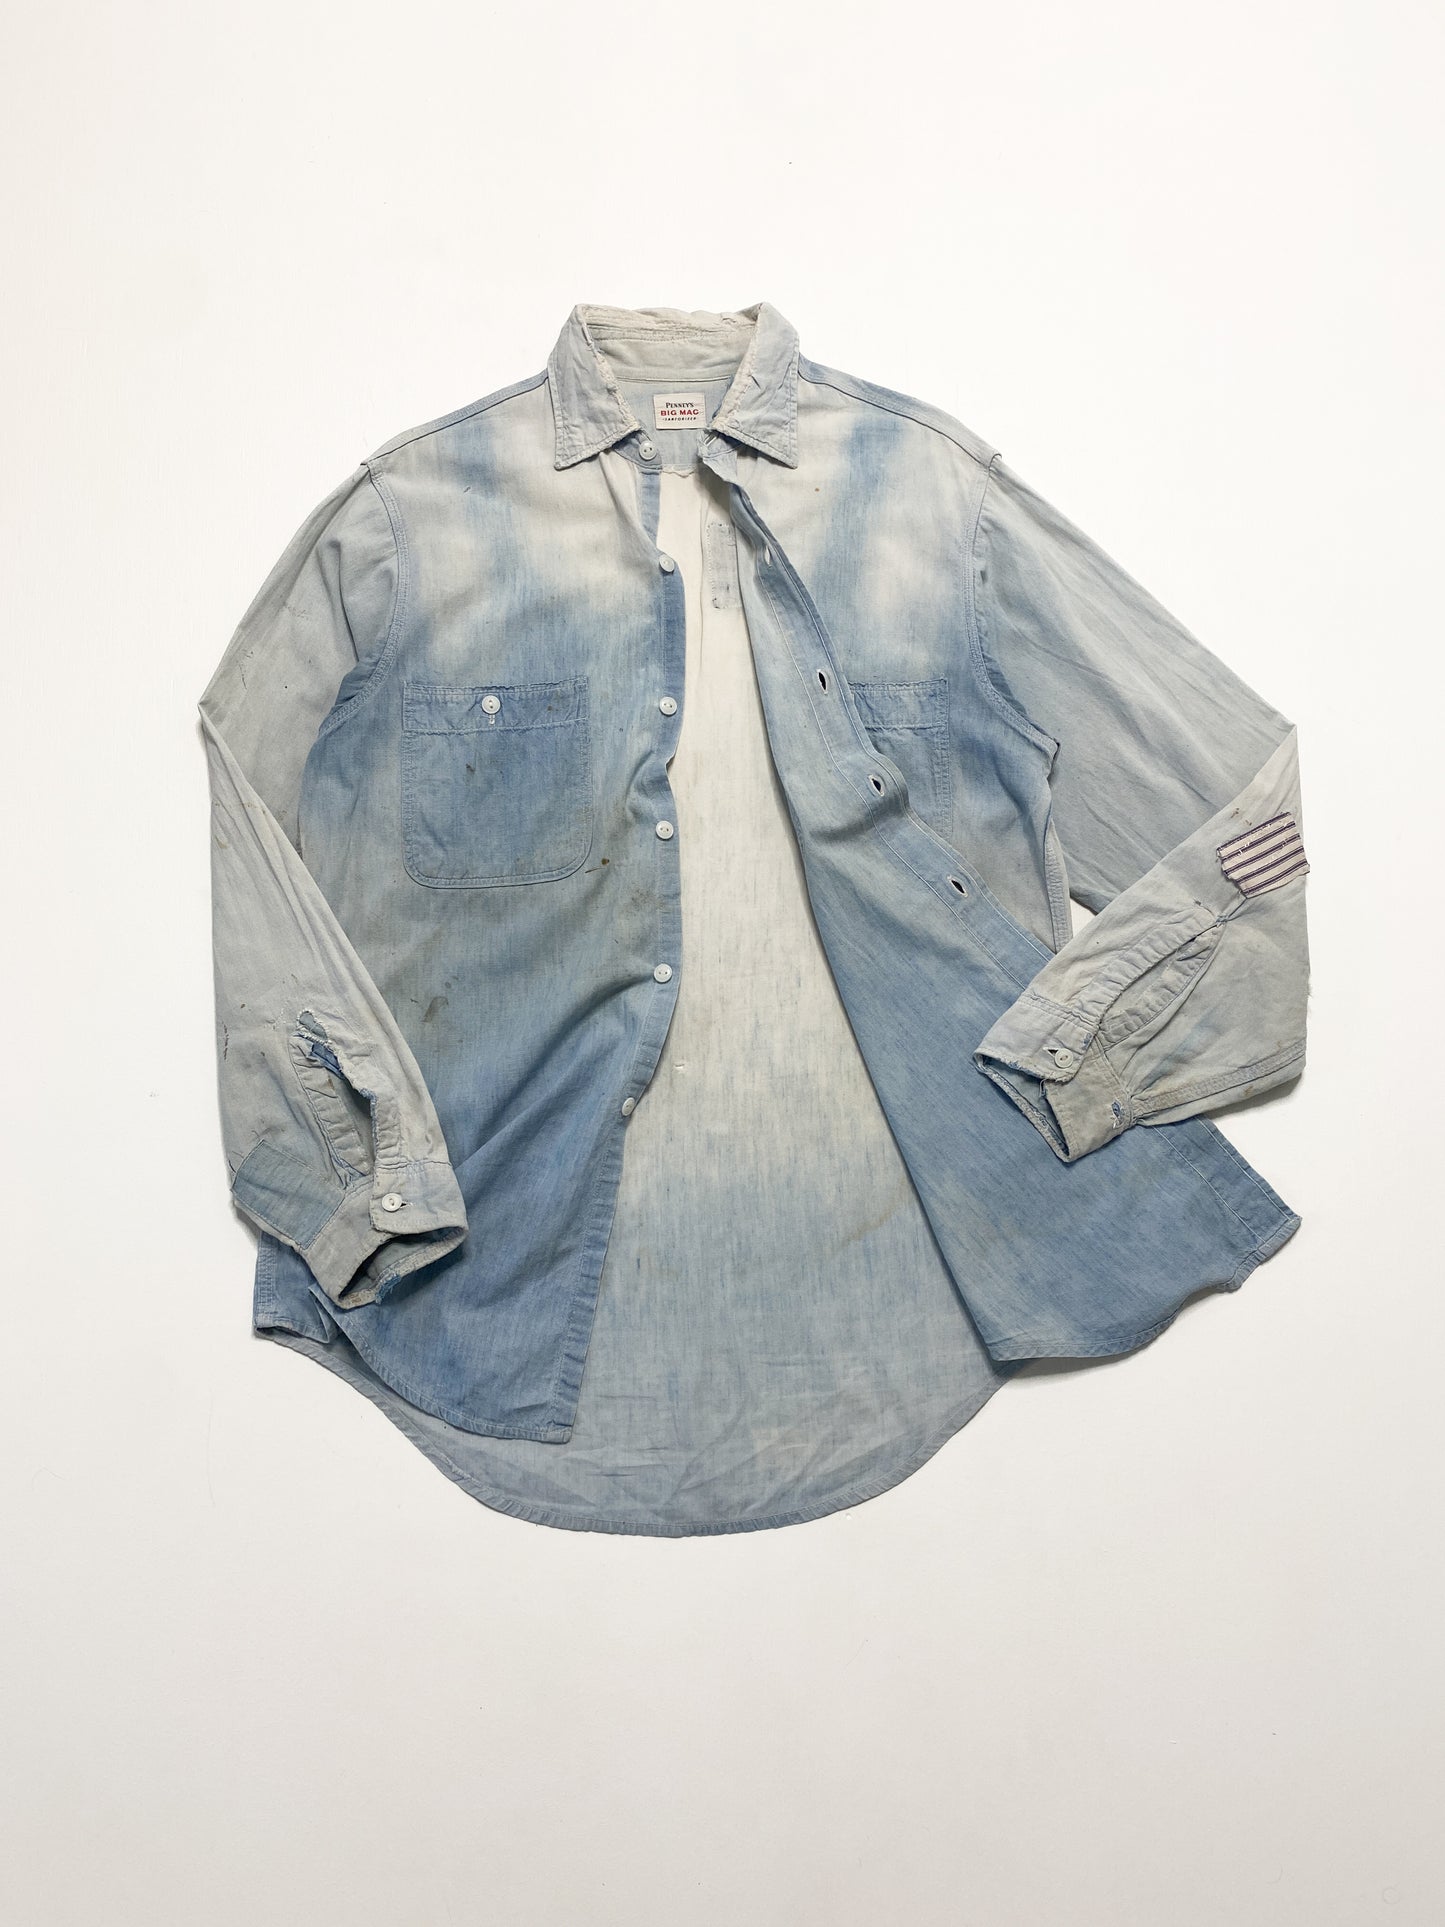 1950’s Penney’s Faded Chambray